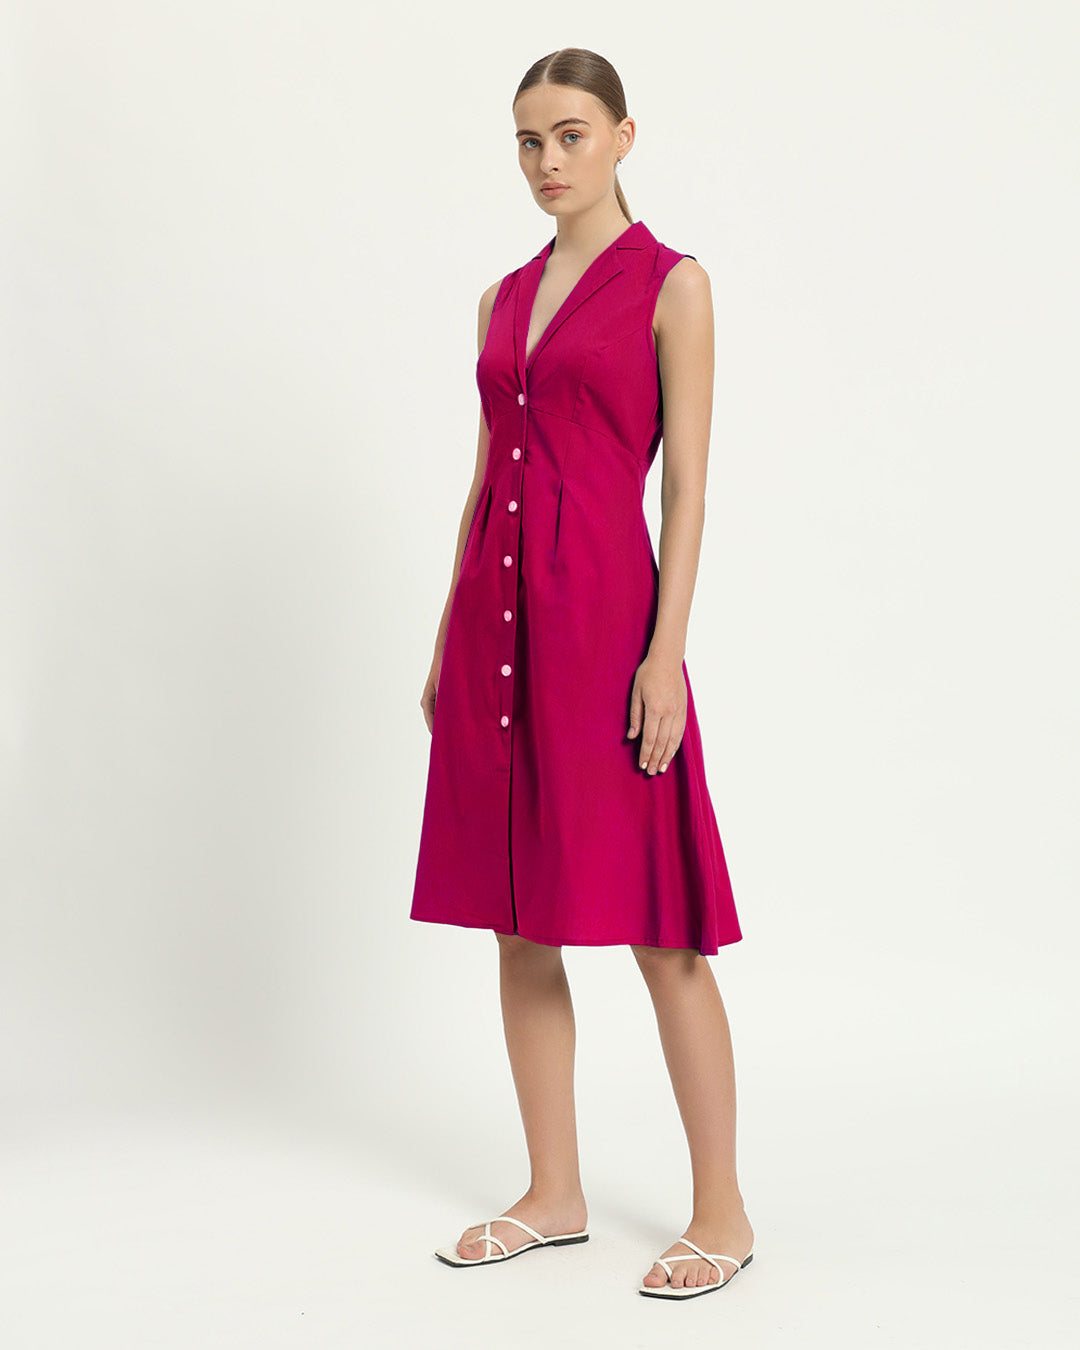 The Germering Berry Cotton Dress